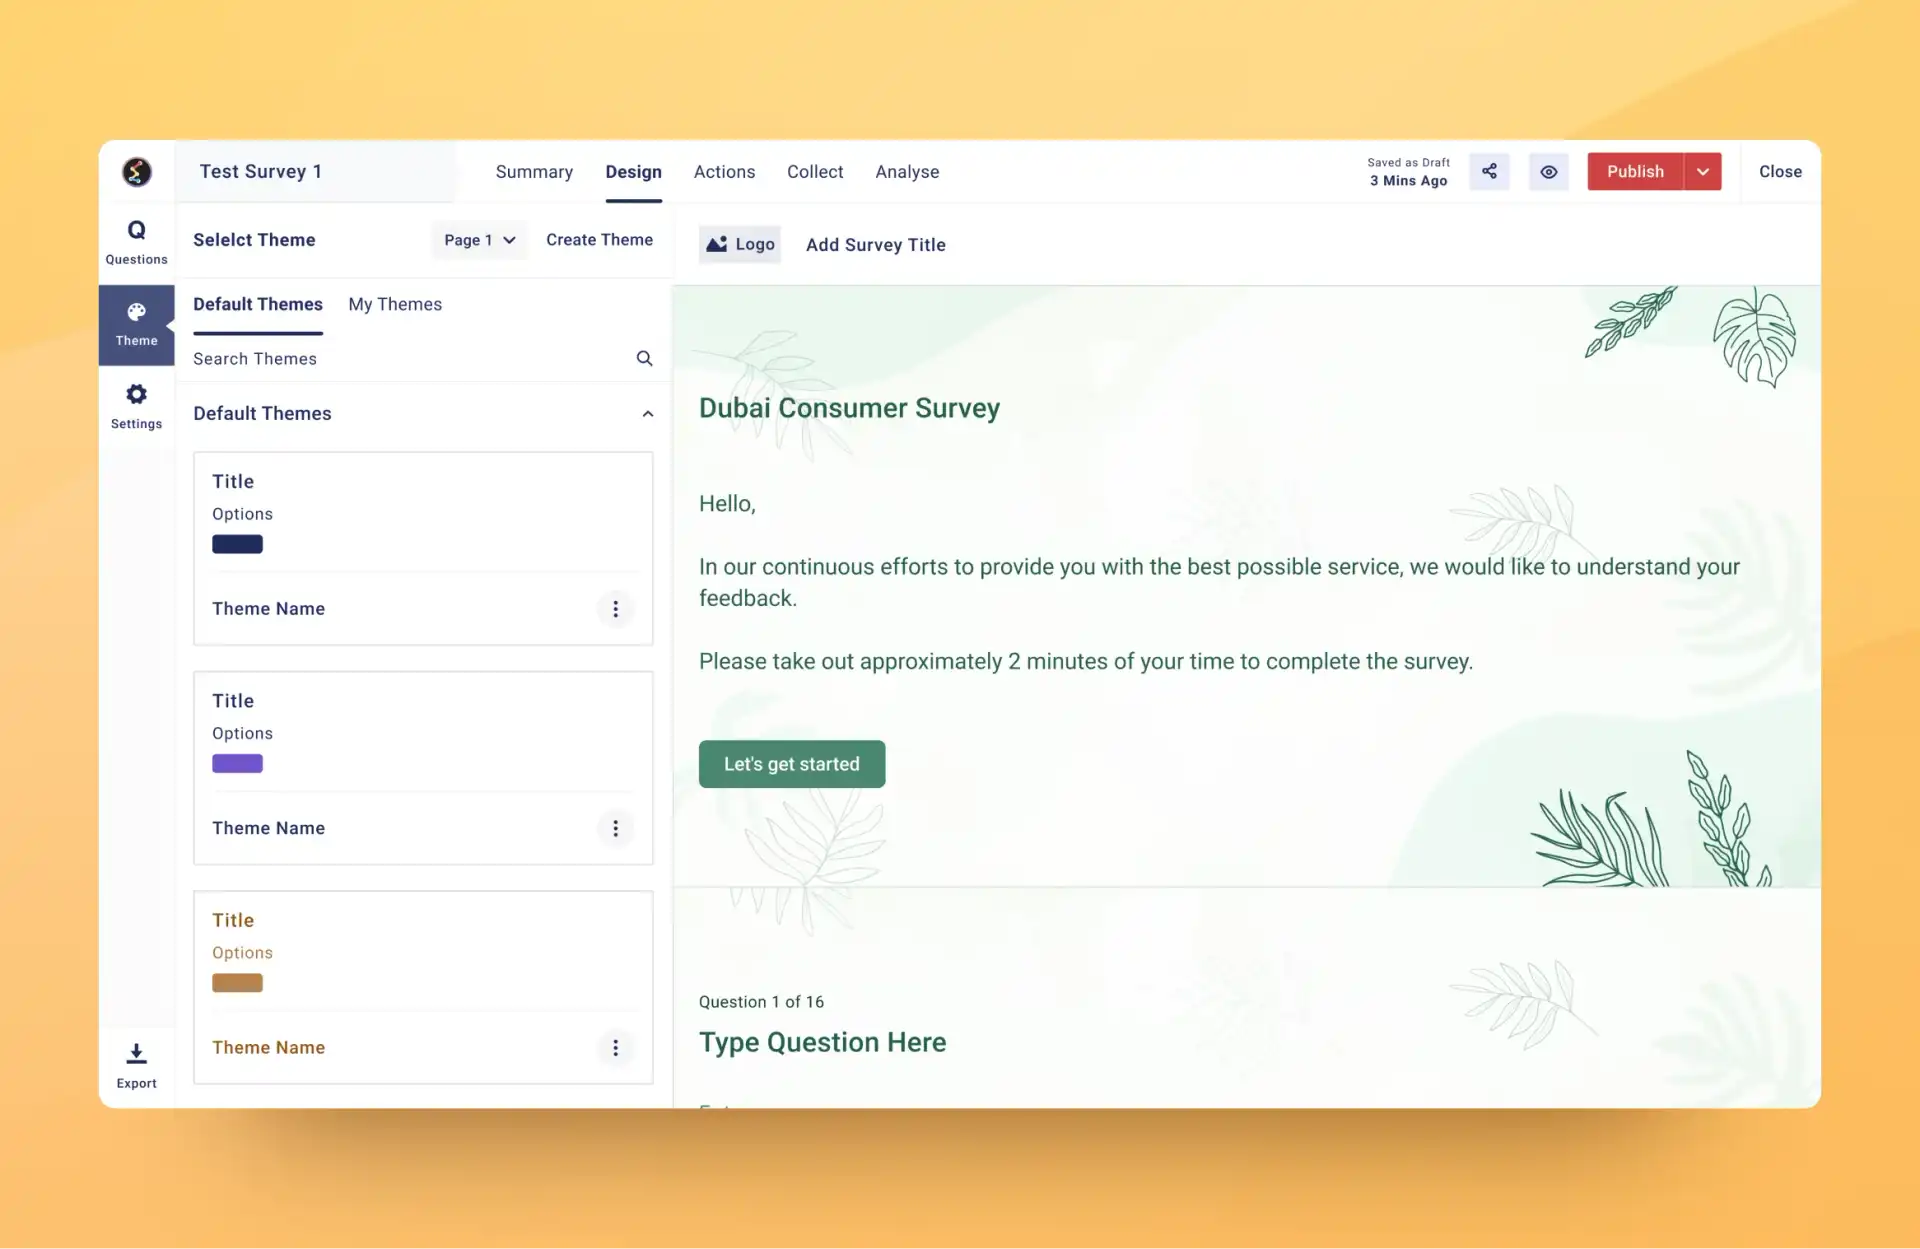 UI Screen to build survey using default themes